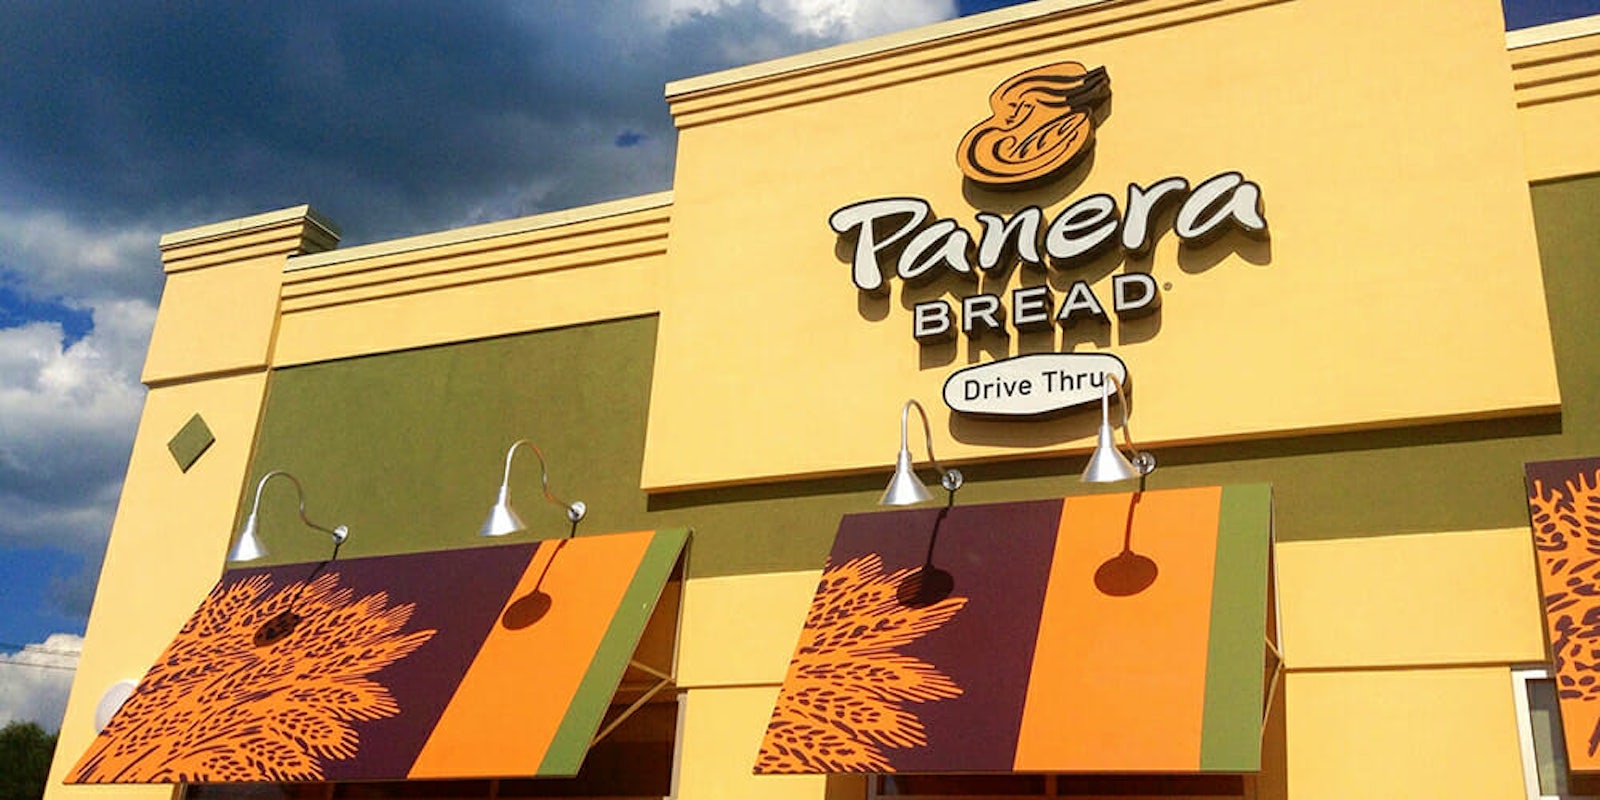 Panera Bread's website reportedly left millions of customers' data exposed for at least eight months.